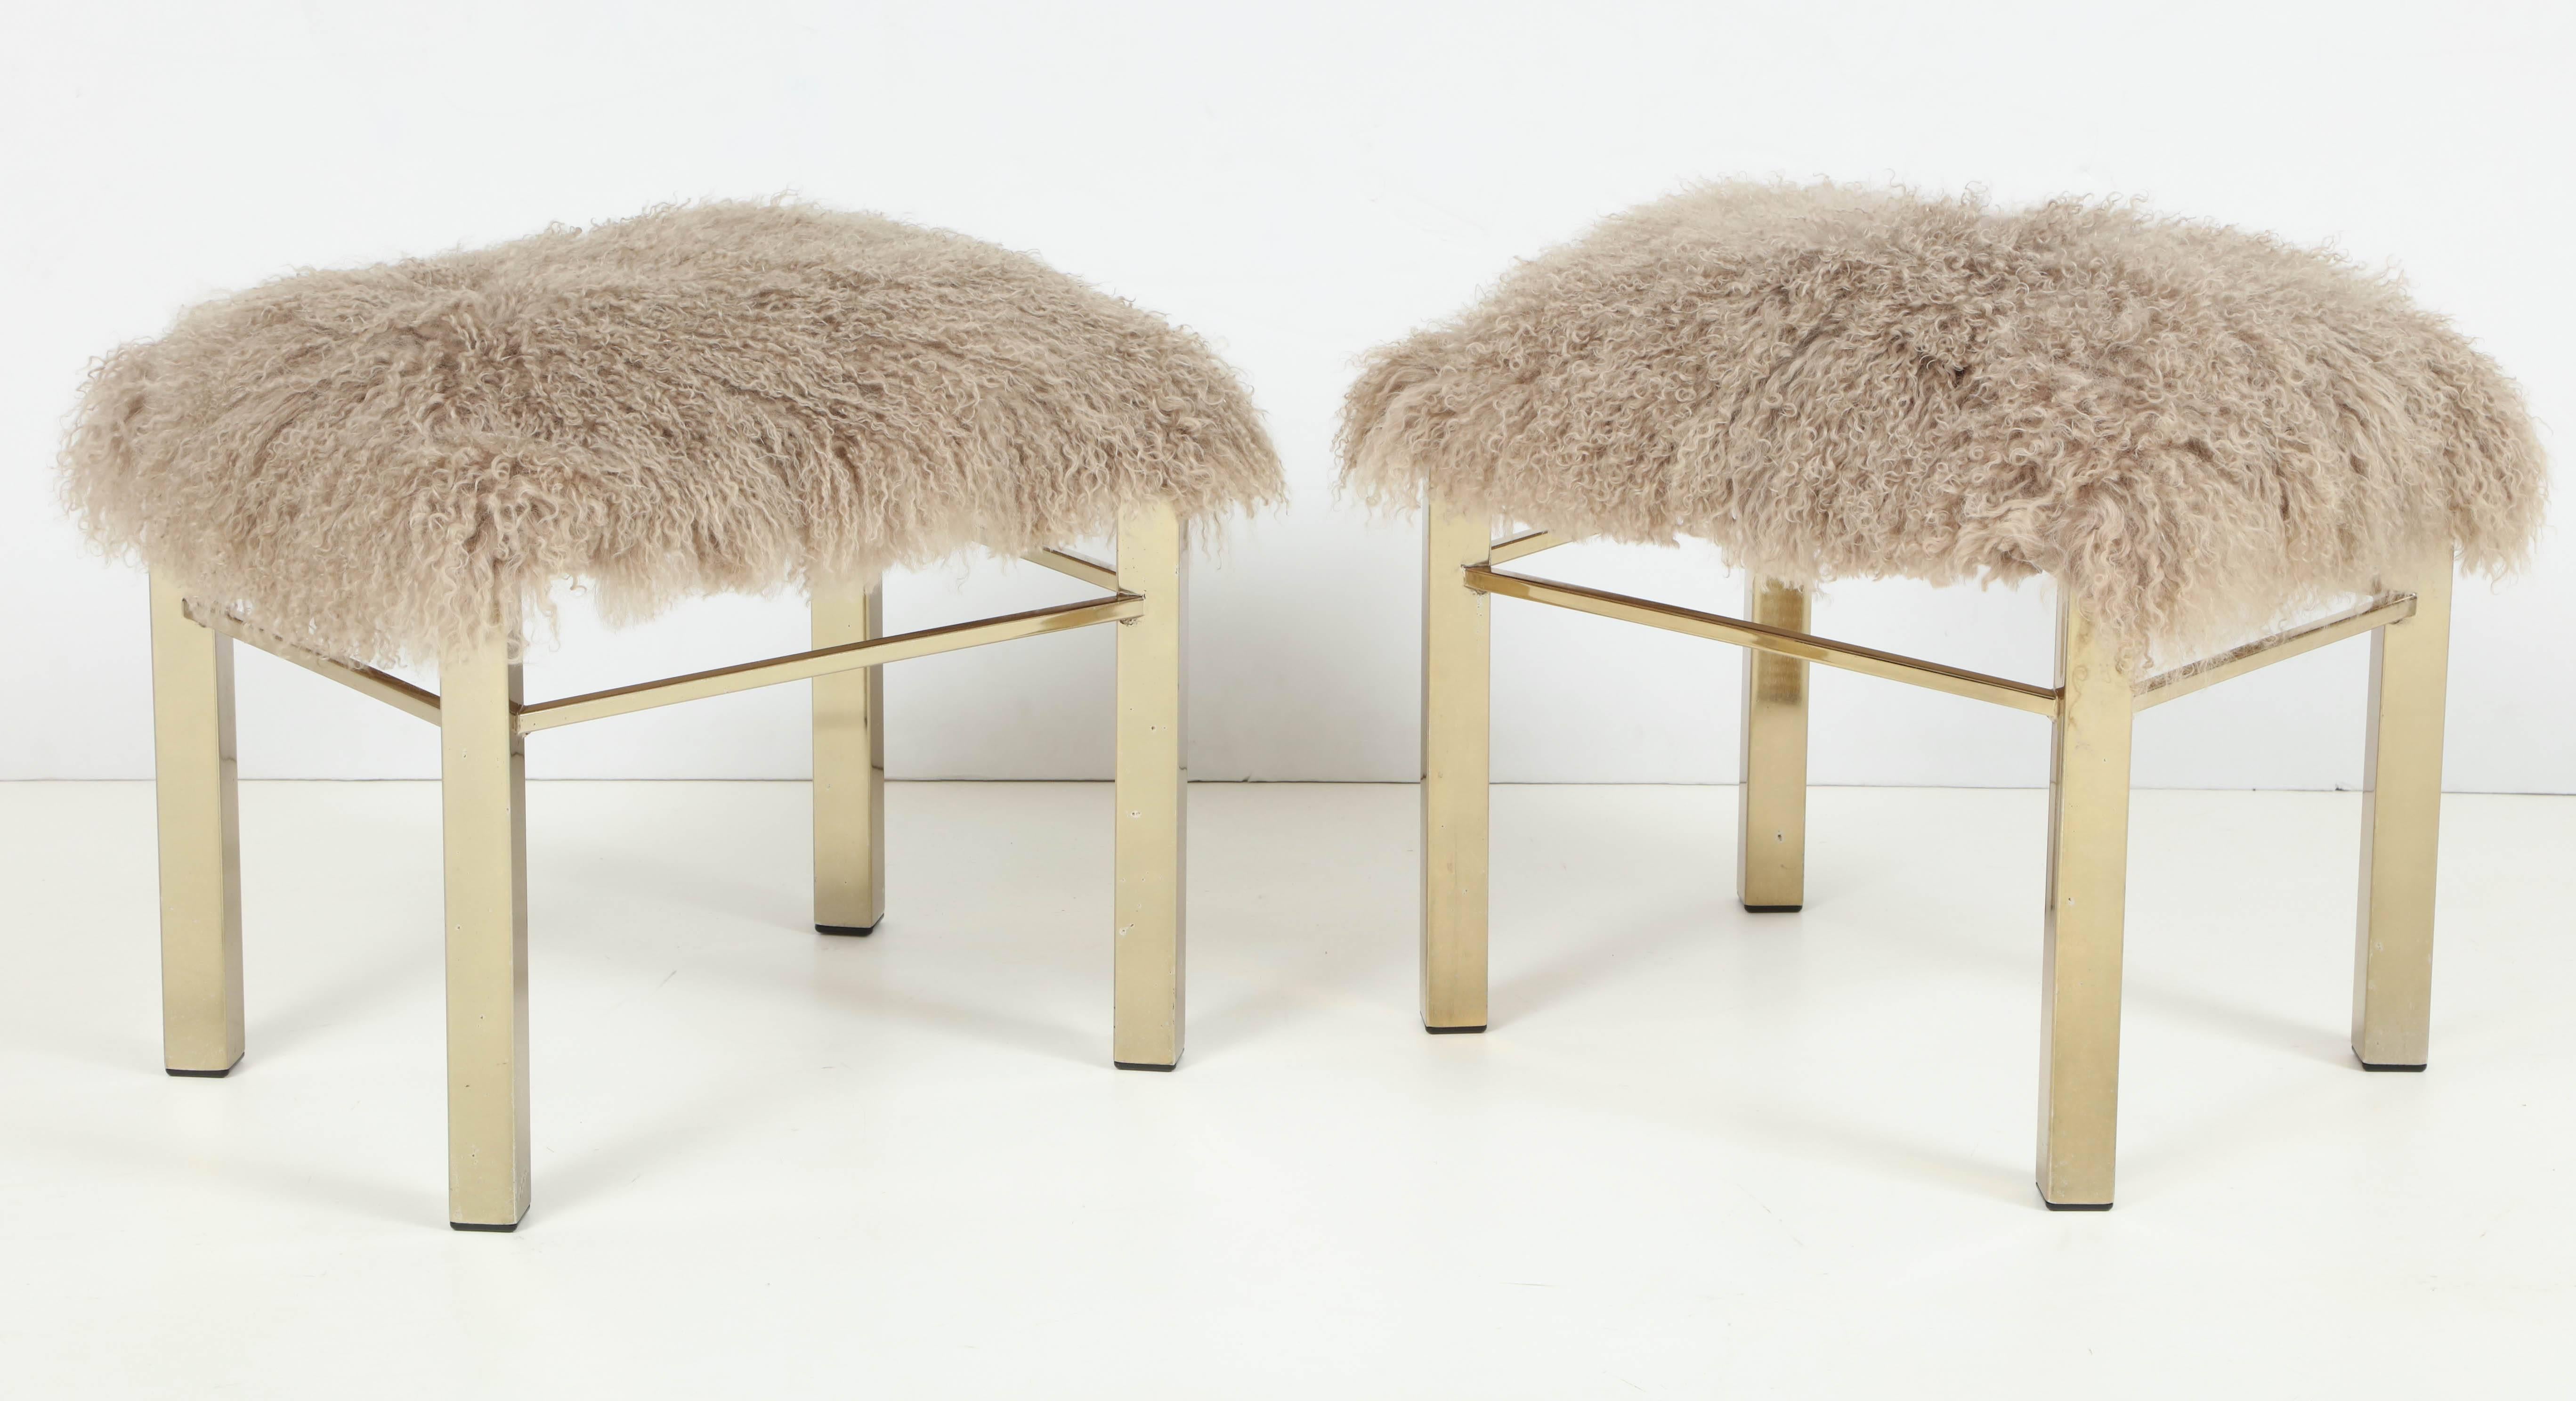 Wonderfully elegant and chic matching pair of brass-plated steel stools or benches. Newly upholstered in silky taupe or beige colored long haired Argentine Mongolian goat hide. 

This pair of stools is on display at the 1stdibs showroom at the New